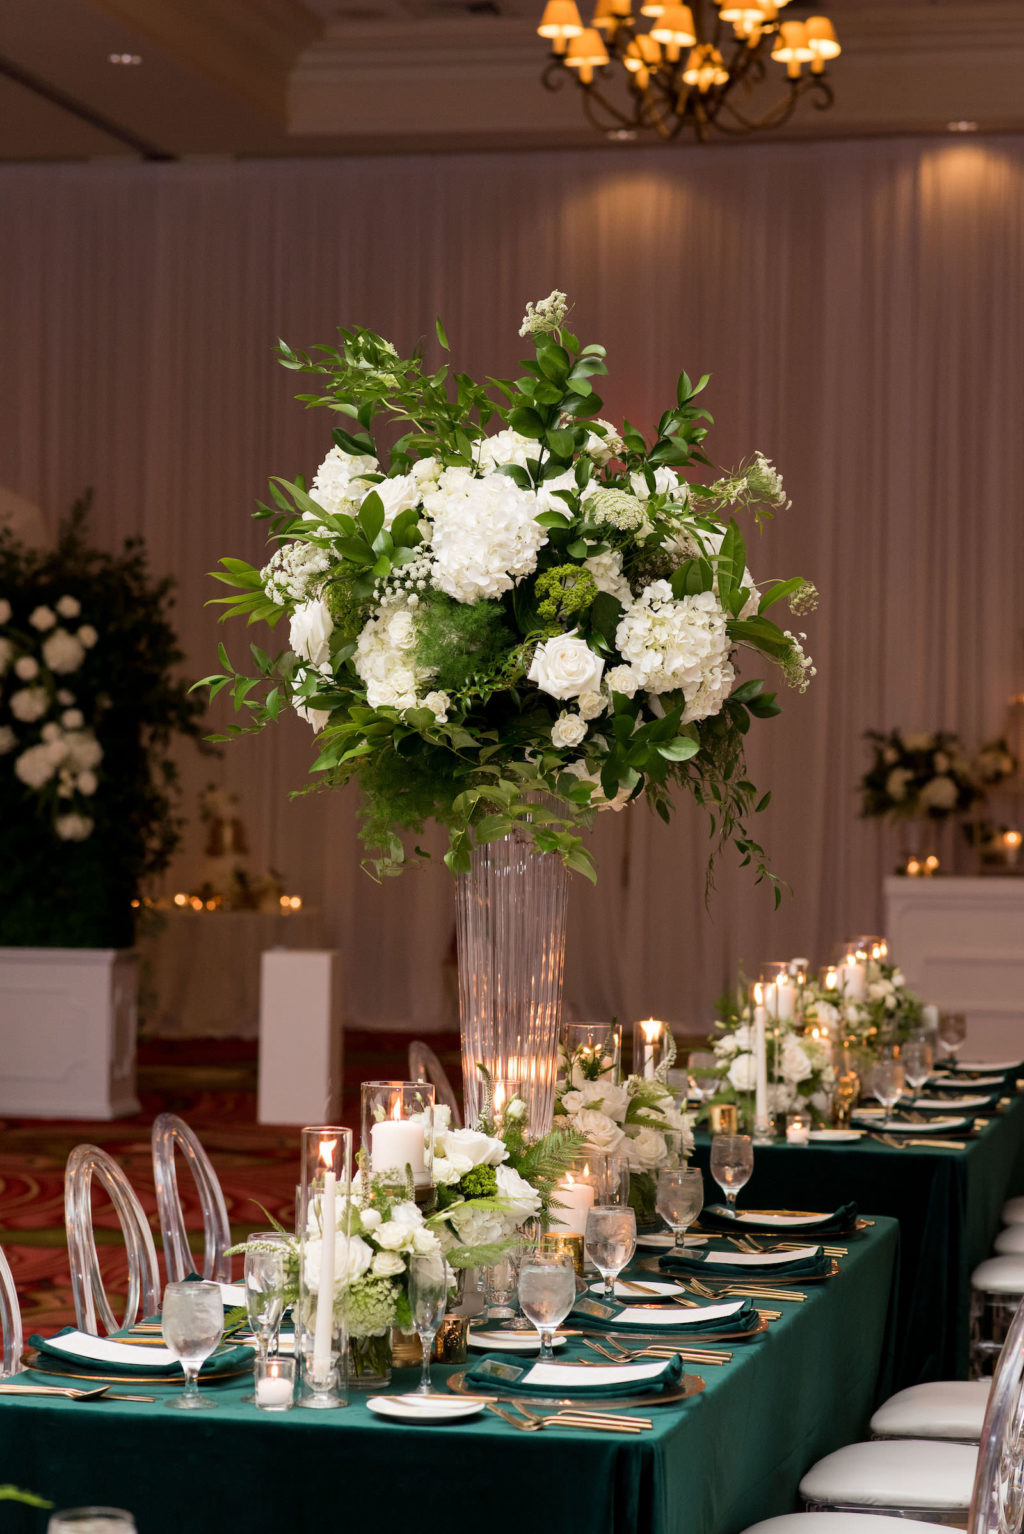 Elegant Wedding Reception Decor, Long Feasting Table with Emerald Green Linens, Gold Rimmed Chargers and Flatware Candles, Tall White Roses and Greenery Floral Arrangements, Acrylic Chiavari Chairs | Tampa Bay Wedding Planner Parties A'la Carte | Wedding Chairs, Chargers, Chairs and Flatware Rentals A Chair Affair | Wedding Florist Bruce Wayne Florals